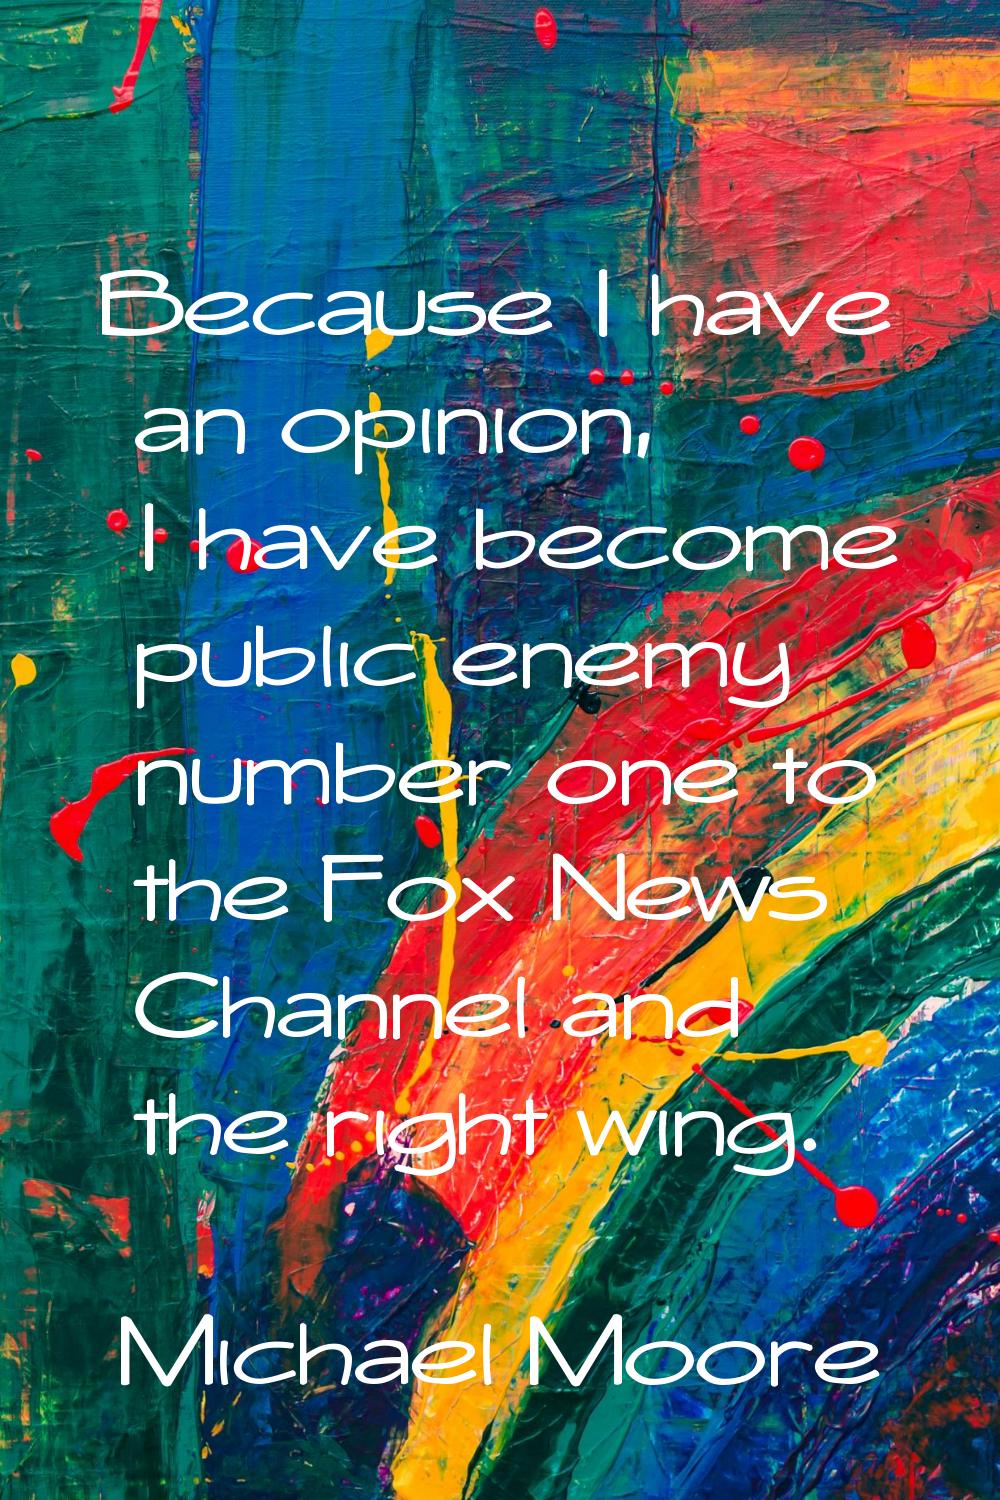 Because I have an opinion, I have become public enemy number one to the Fox News Channel and the ri